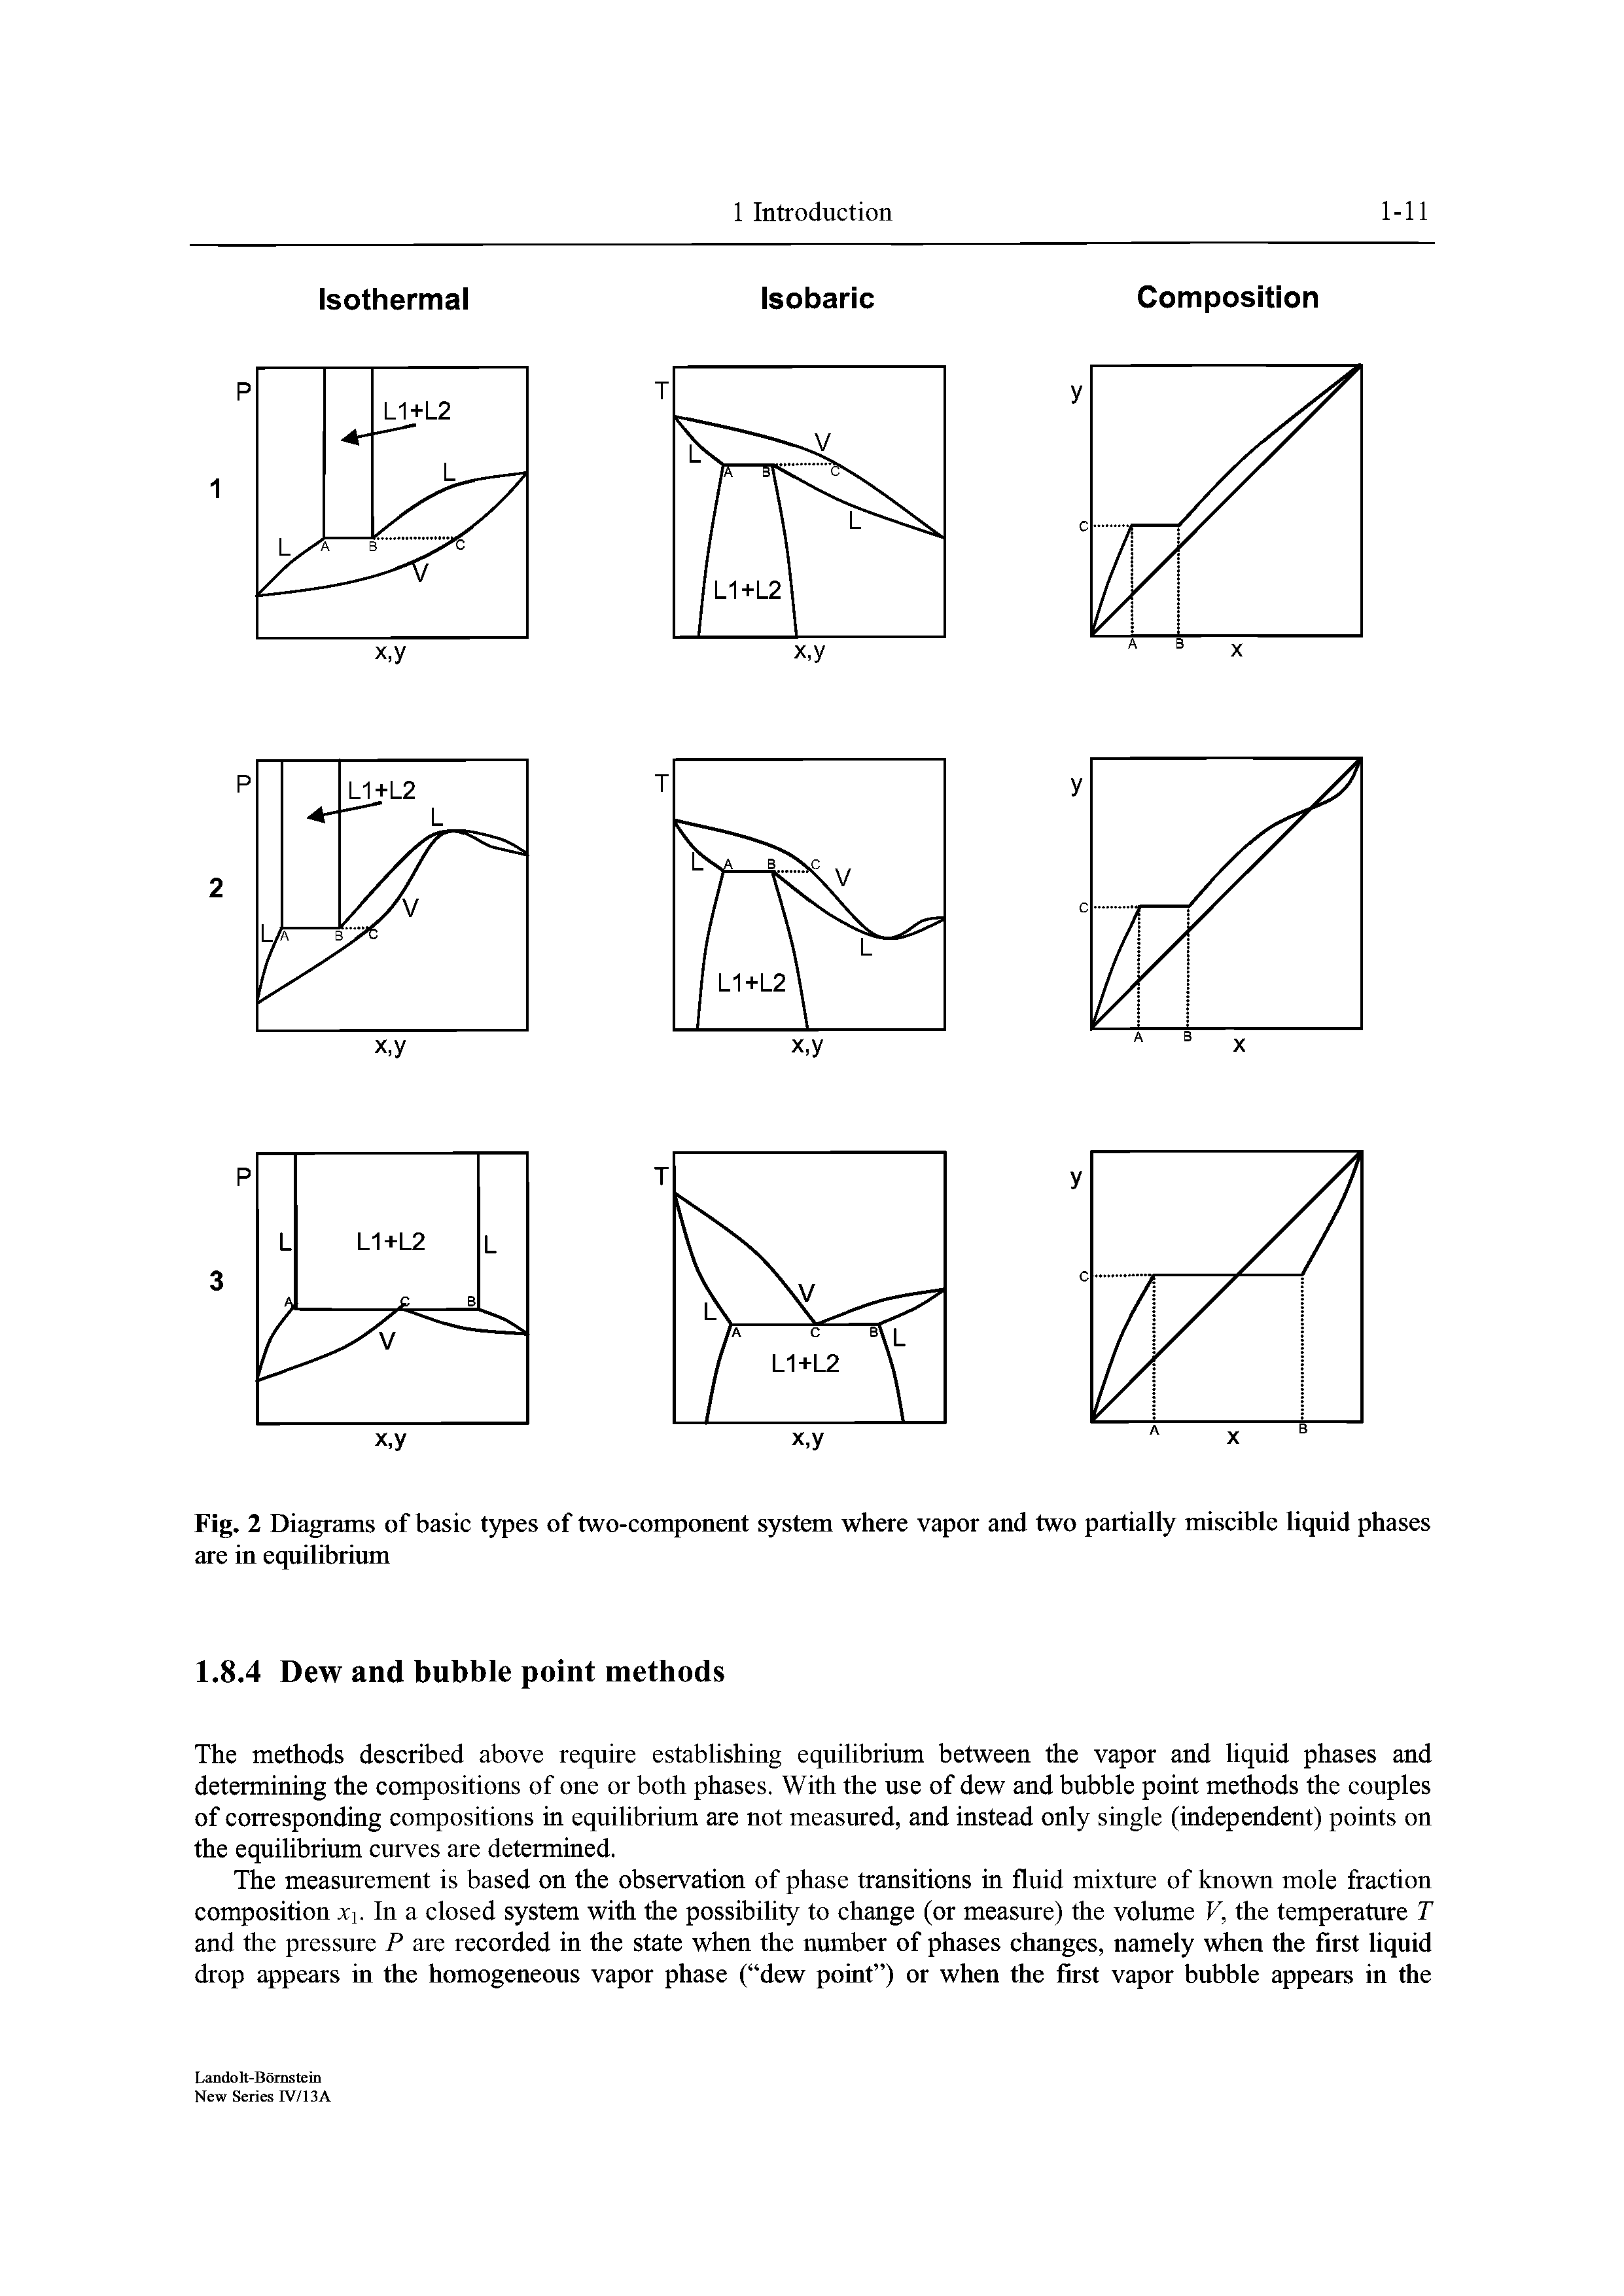 Fig. 2 Diagrams of basic types of two-component system where vapor and two partially miscible liquid phases are in equilibrium...